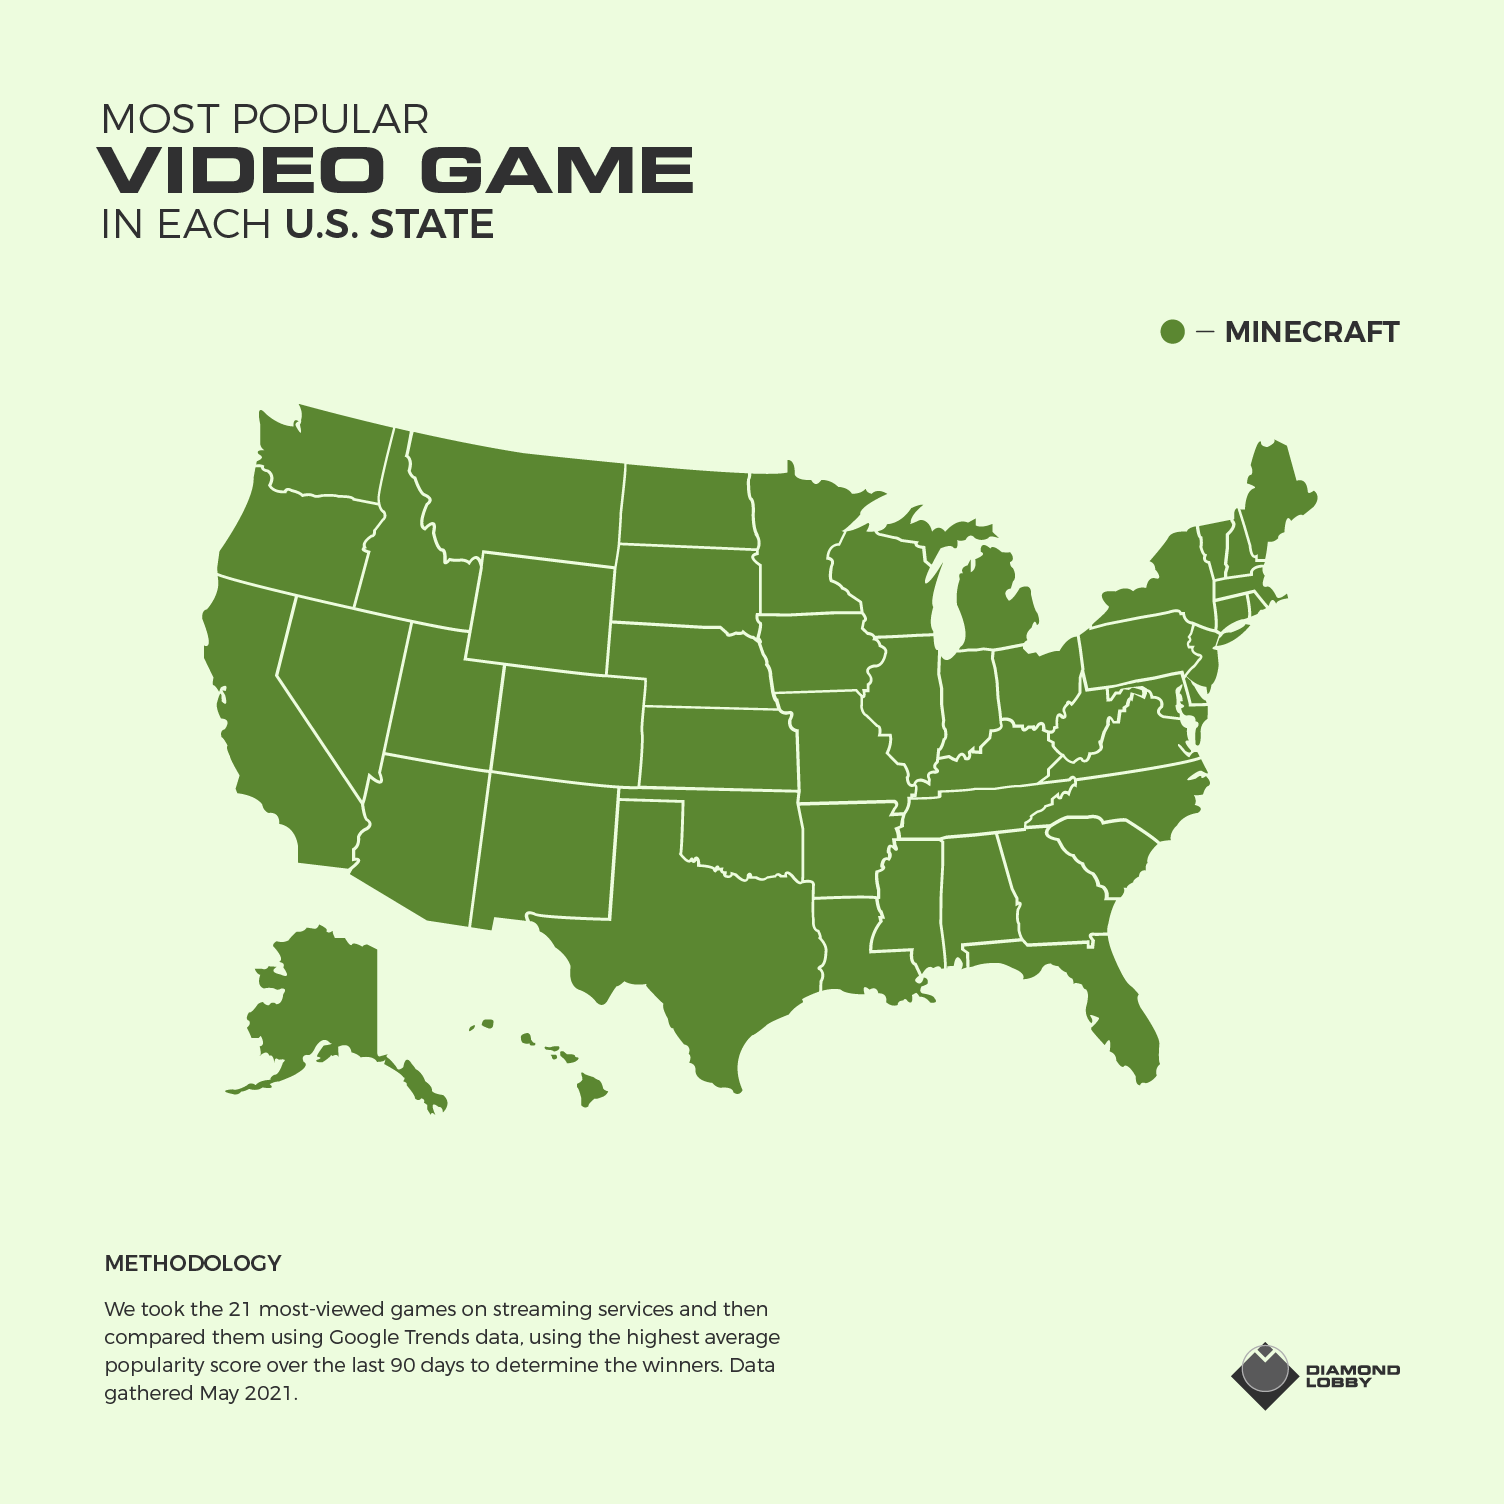 A map showing the most popular game in each US state.